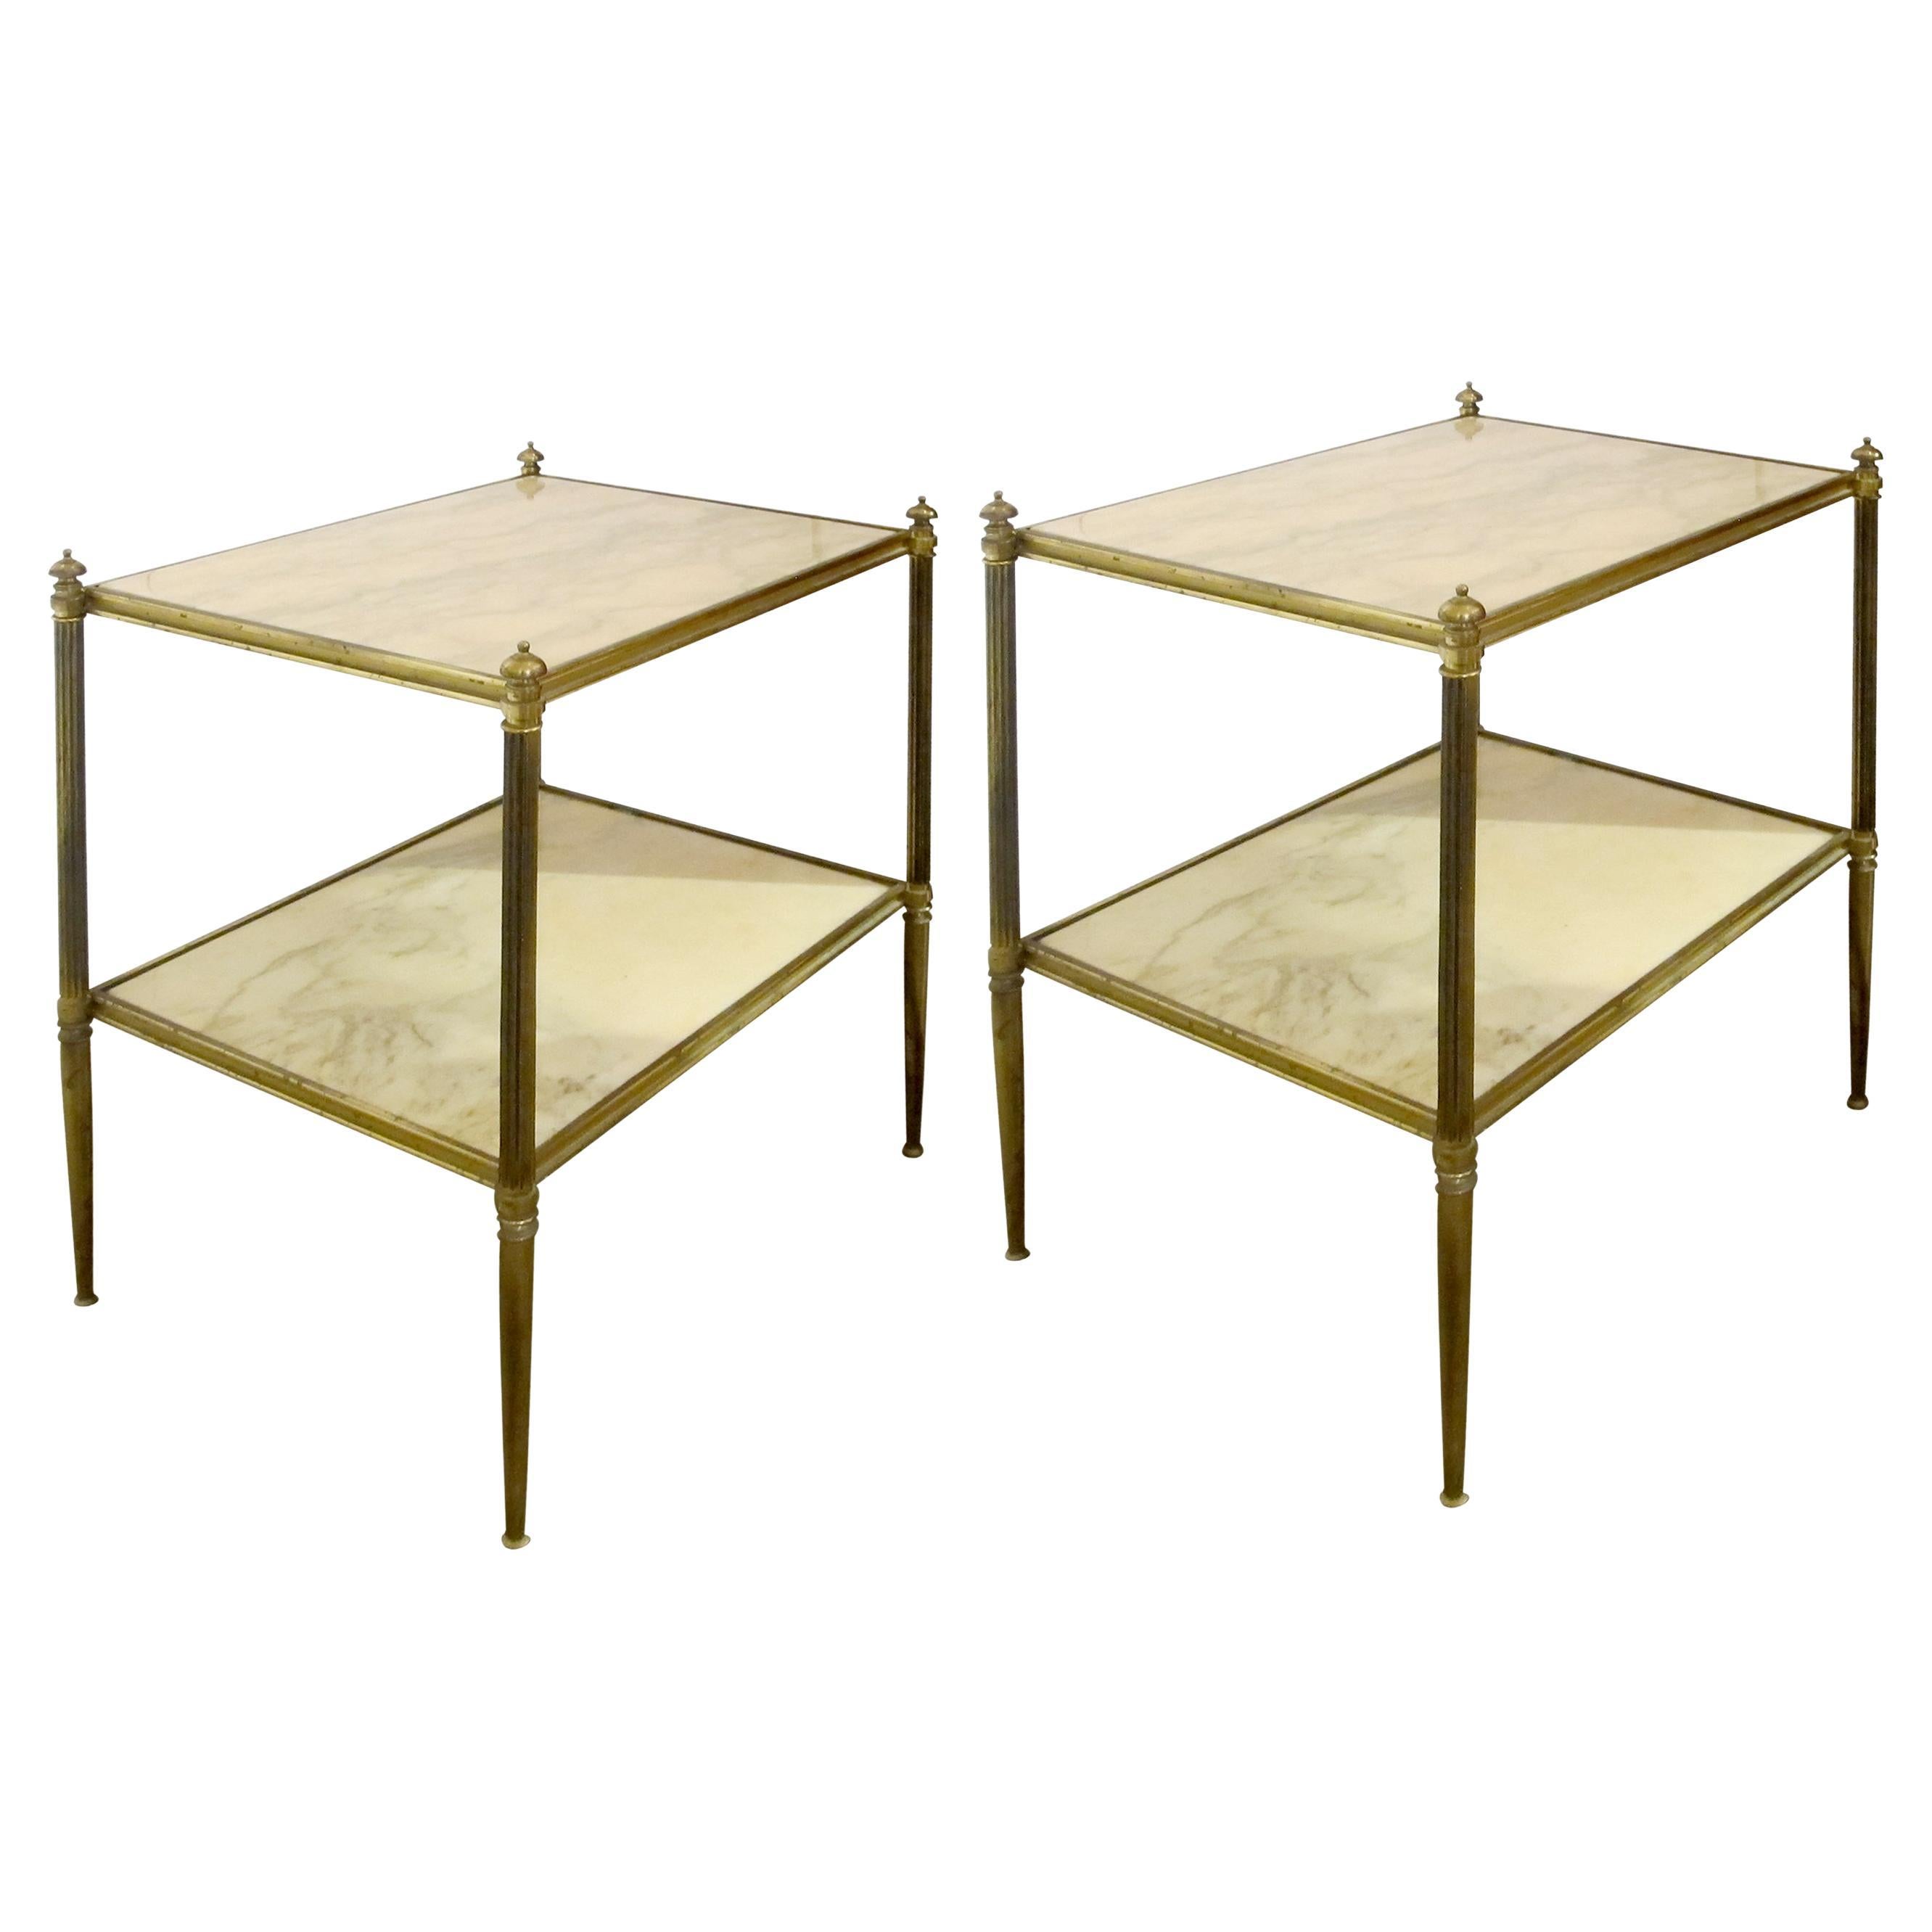 1960s Pair of Two Tiers Cream Marble Side Tables in the Style of Maison Bagues For Sale